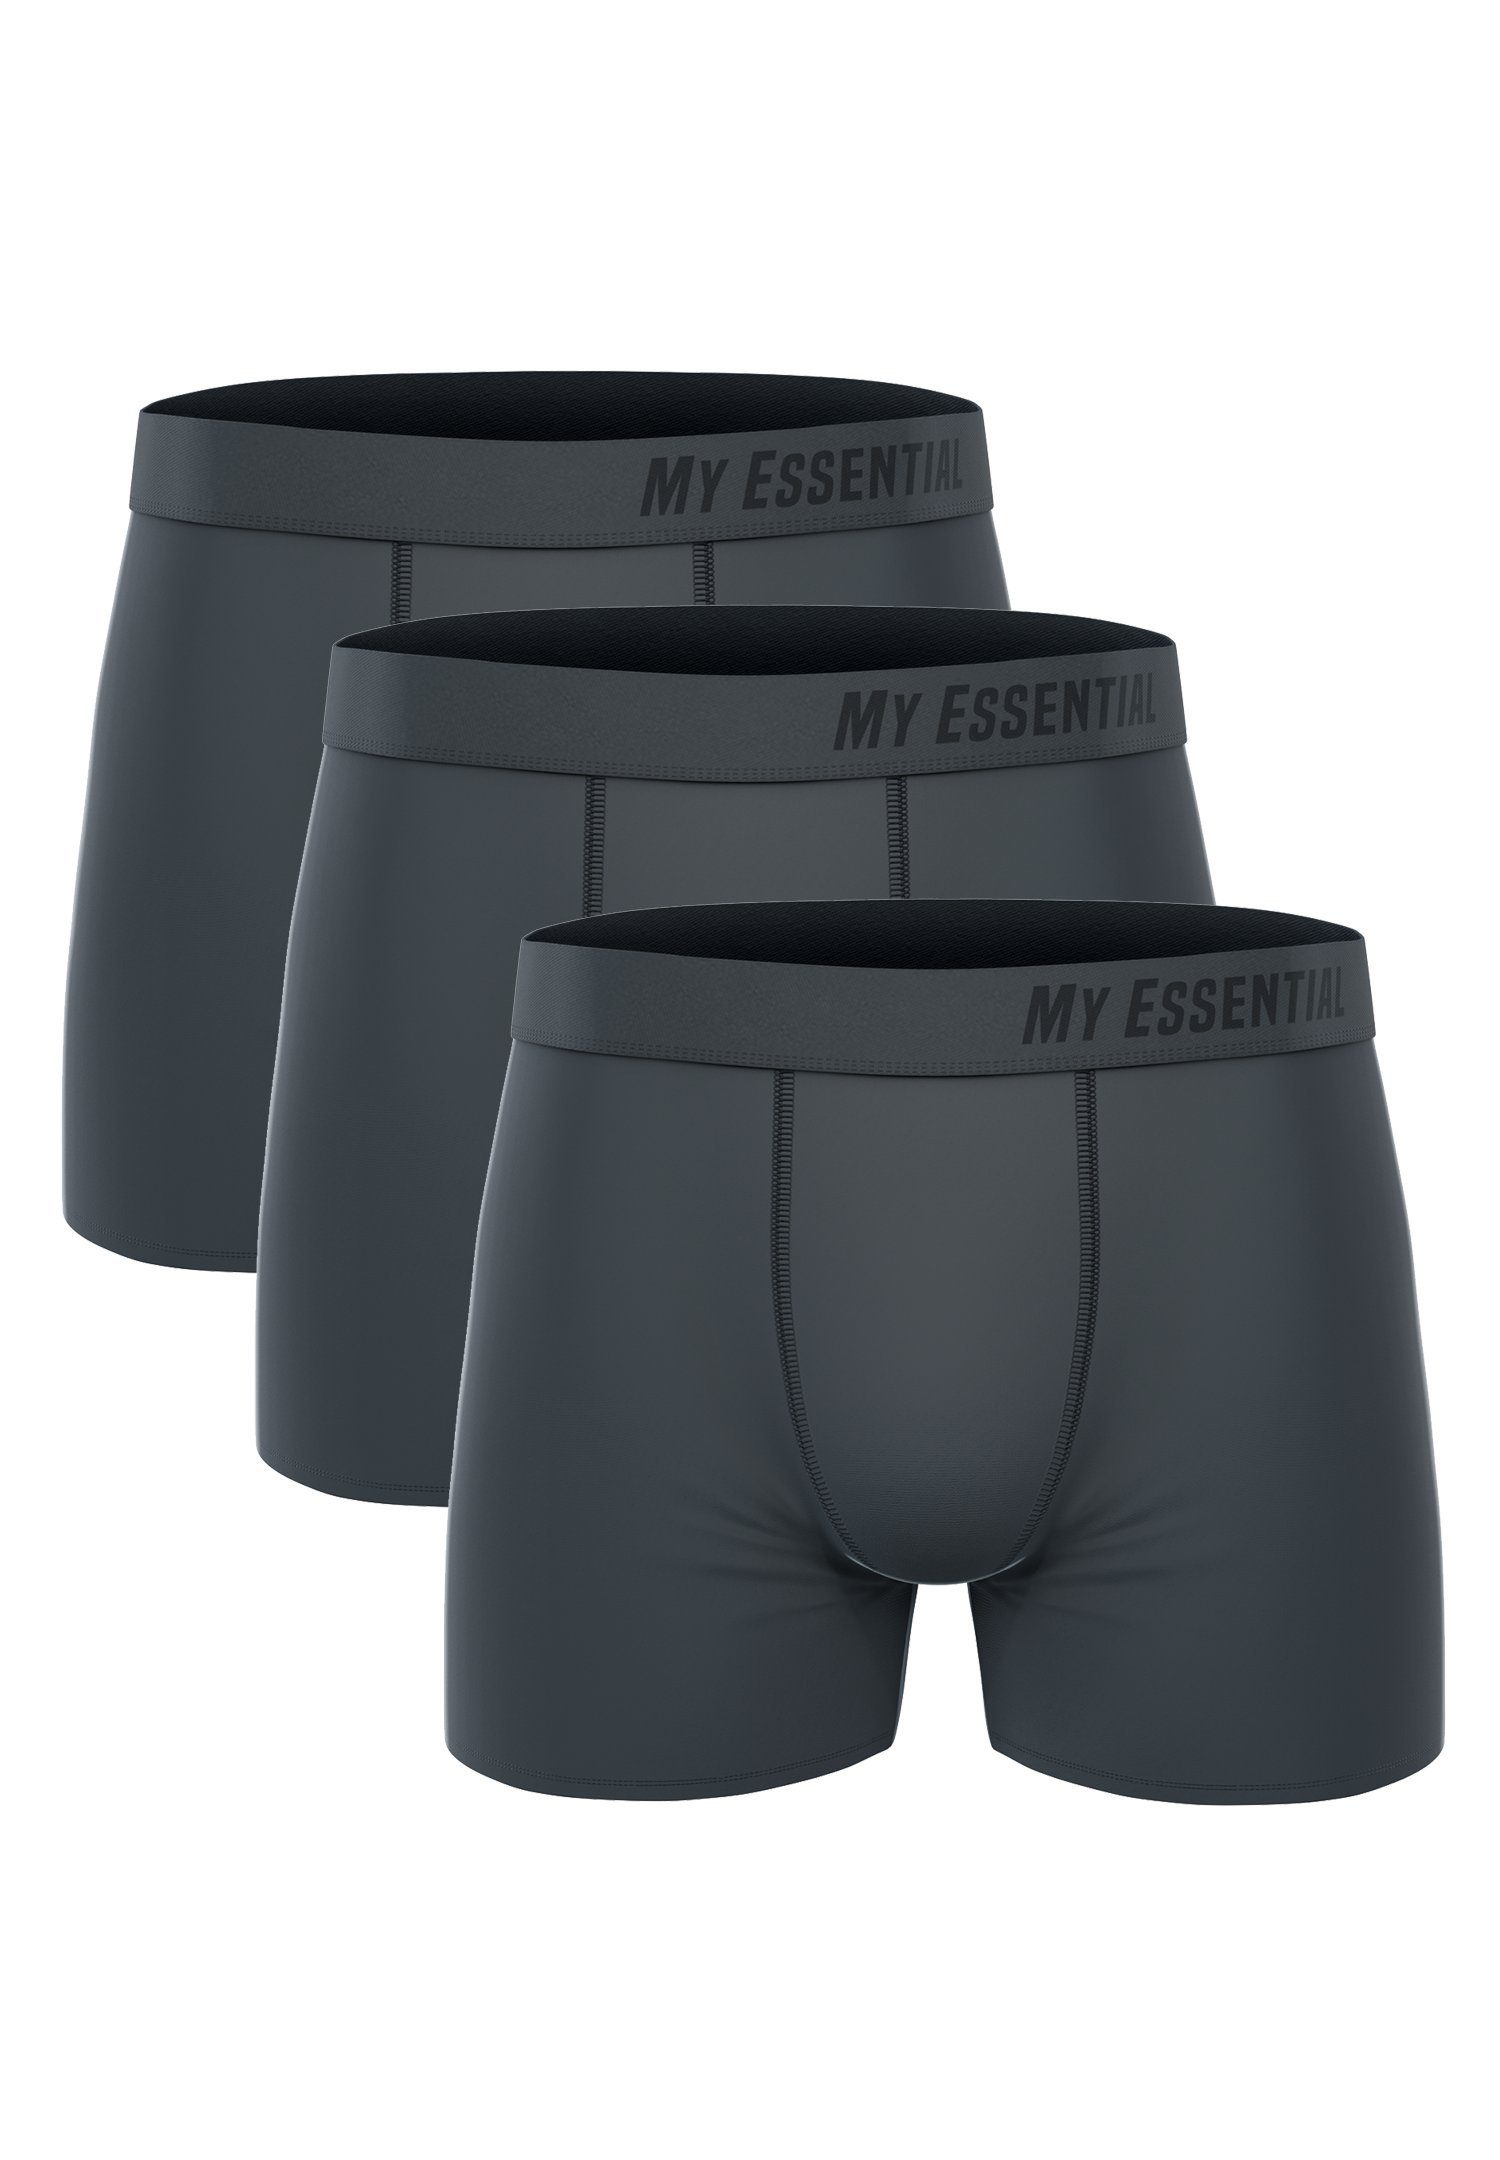 Clothing My Boxershorts Grey 3er-Pack) Essential 3 Bio Cotton My Boxers (Spar-Pack, Essential 3-St., Pack